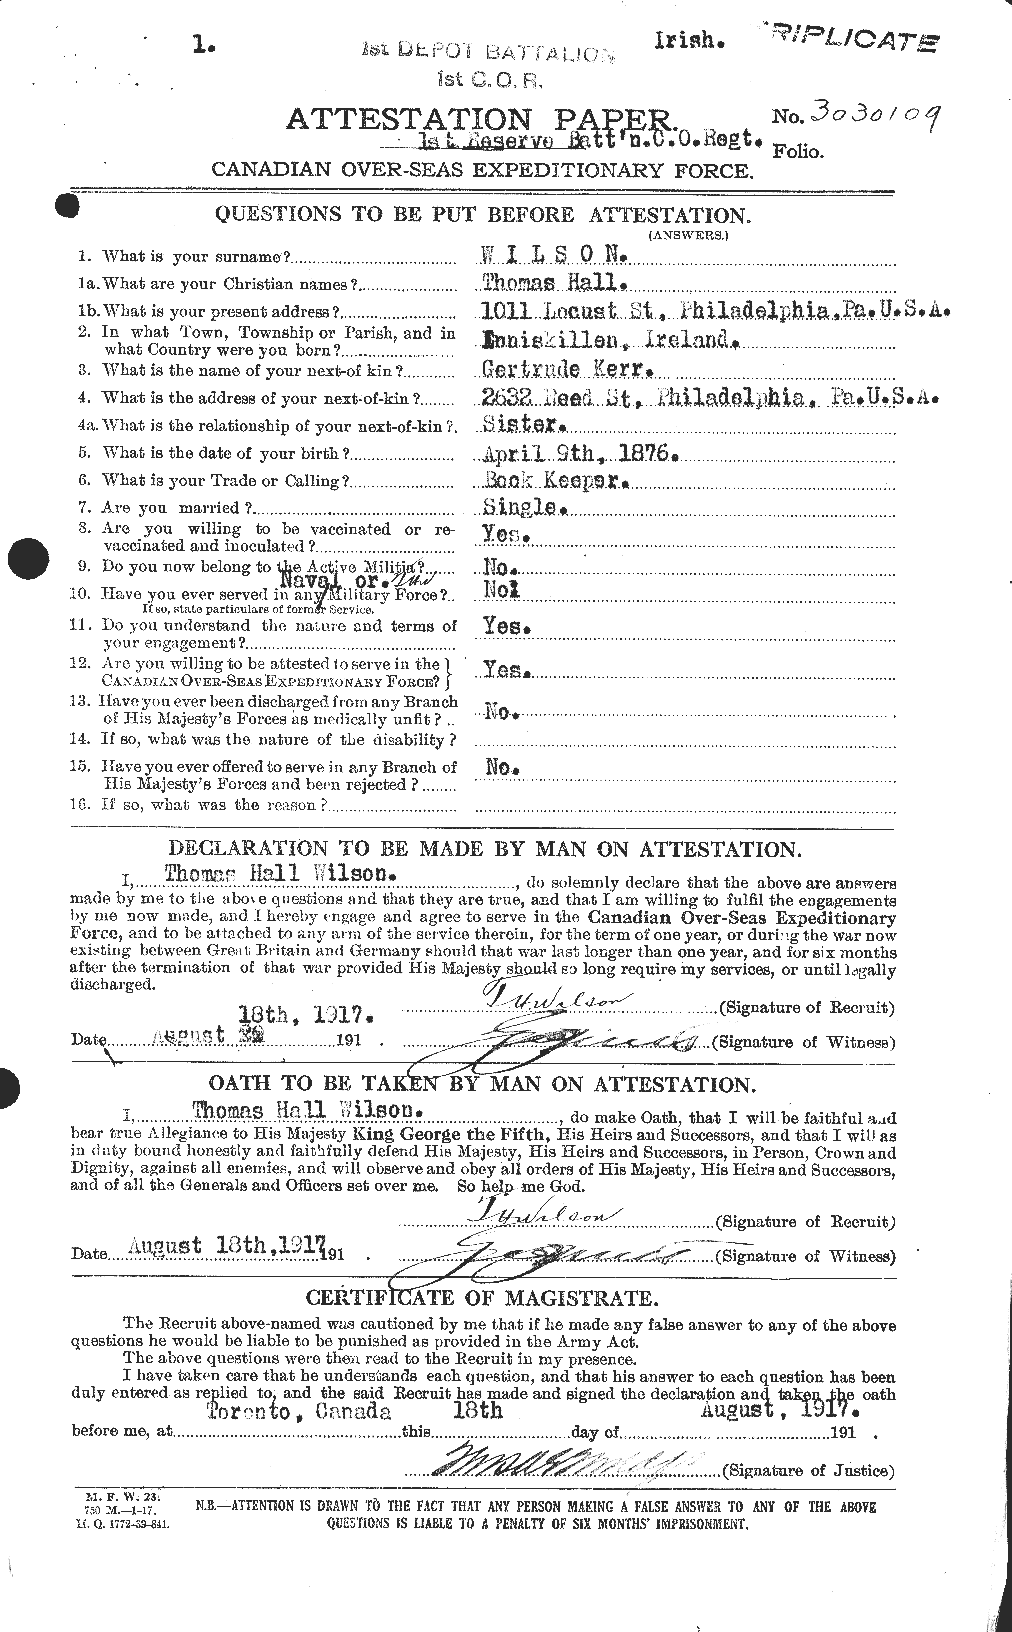 Personnel Records of the First World War - CEF 681263a